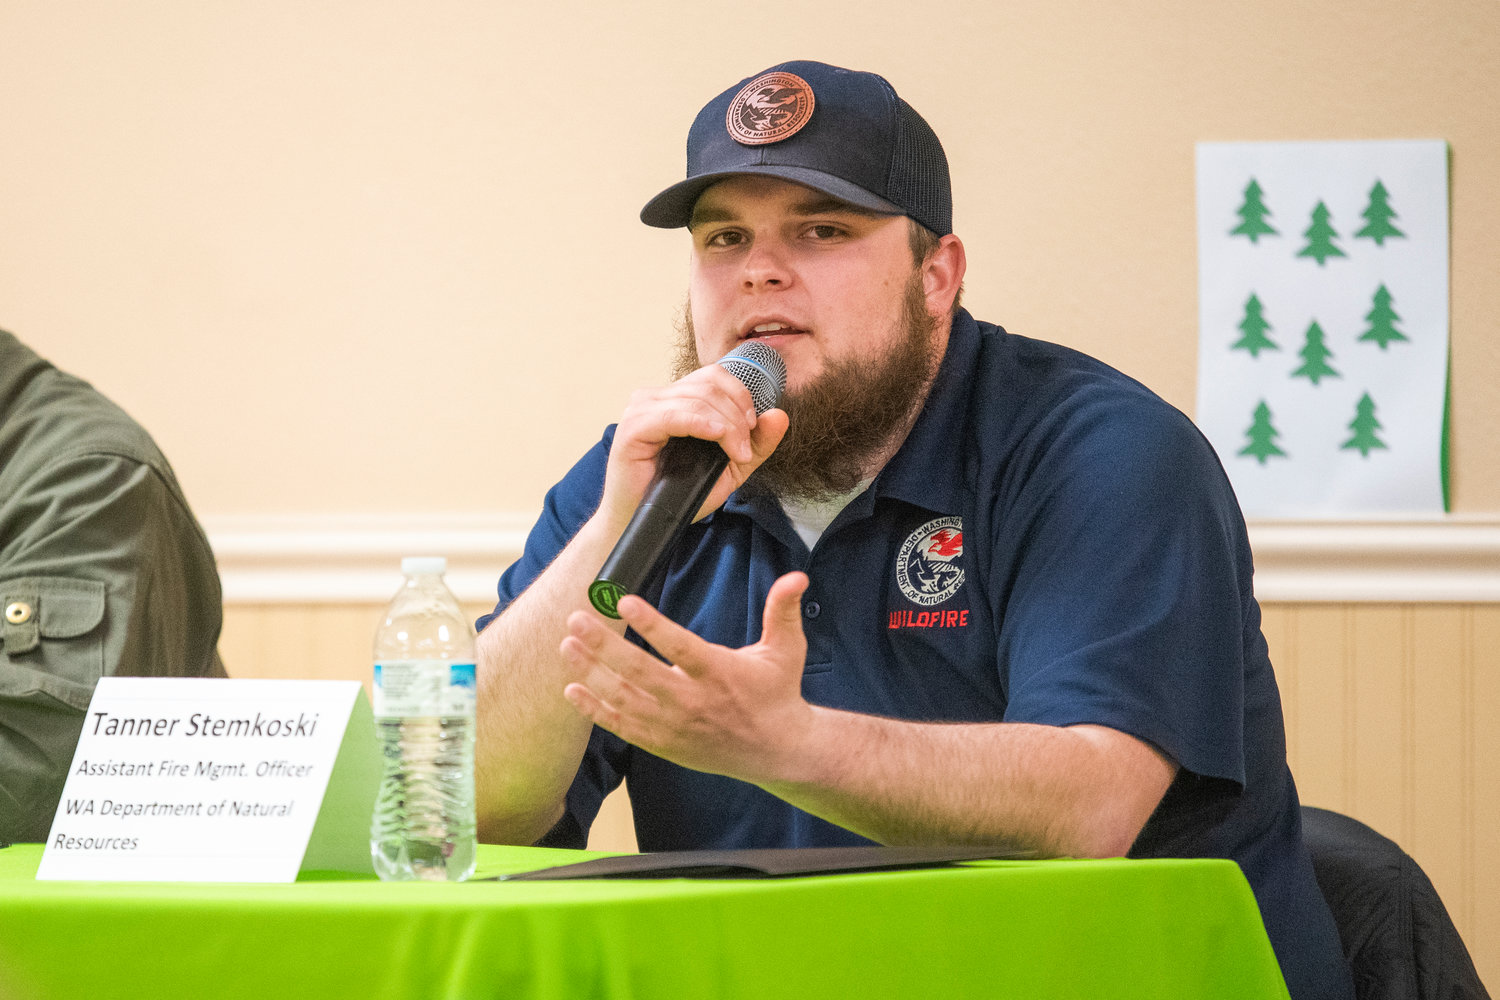 Assistant Fire Management Officer Tanner Stemkoski, with the Washington State Department of Natural Resources talks about the Community Fire Wise program Thursday night at the Packwood Community Center.